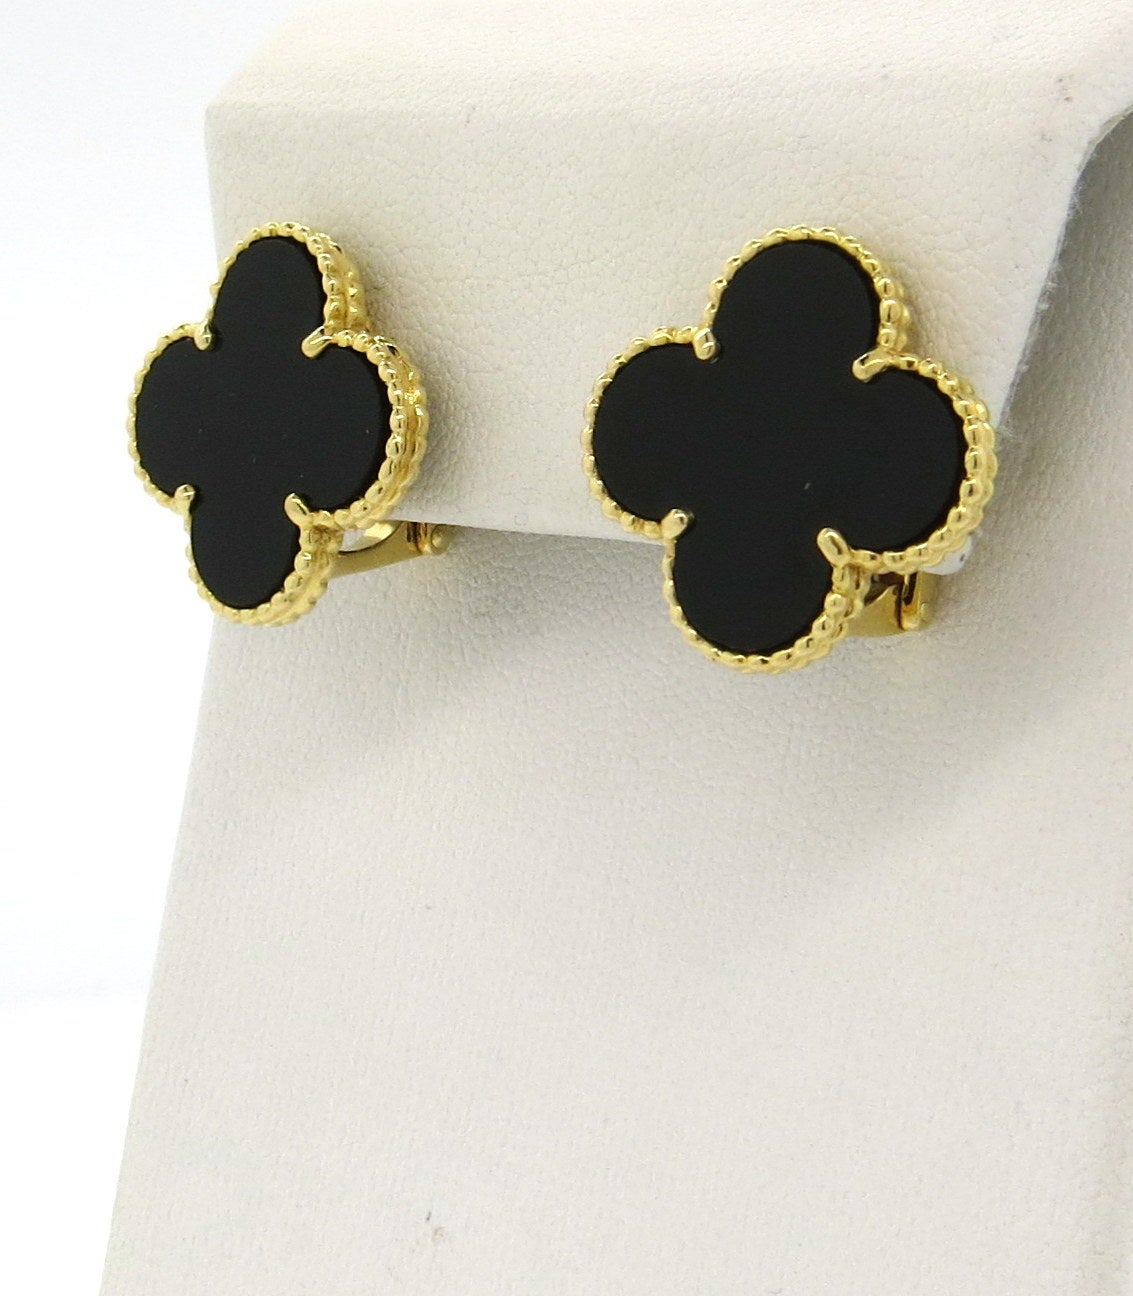 18k gold clover earrings, crafted by Van Cleef & Arpels for iconic Magic Alhambra collection, set with black onyx. Earrings measure 20mm x 20mm. Marked VCA,G750,JB030494. Weight - 10.3 grams.

Earrings come with  VCA certificate of authenticity.